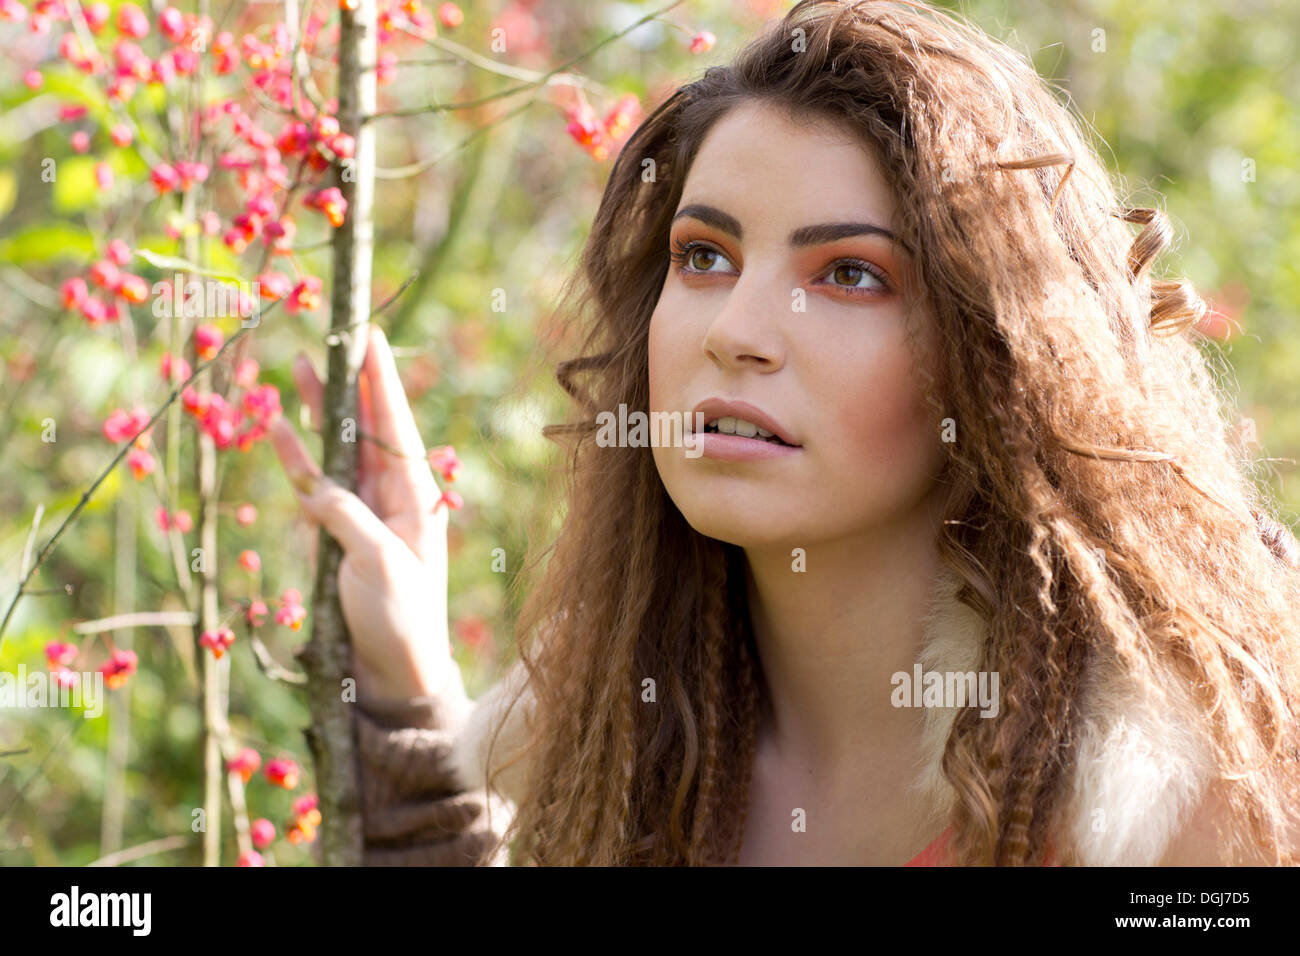 Portrait of a young woman outdoors in autumn Stock Photo